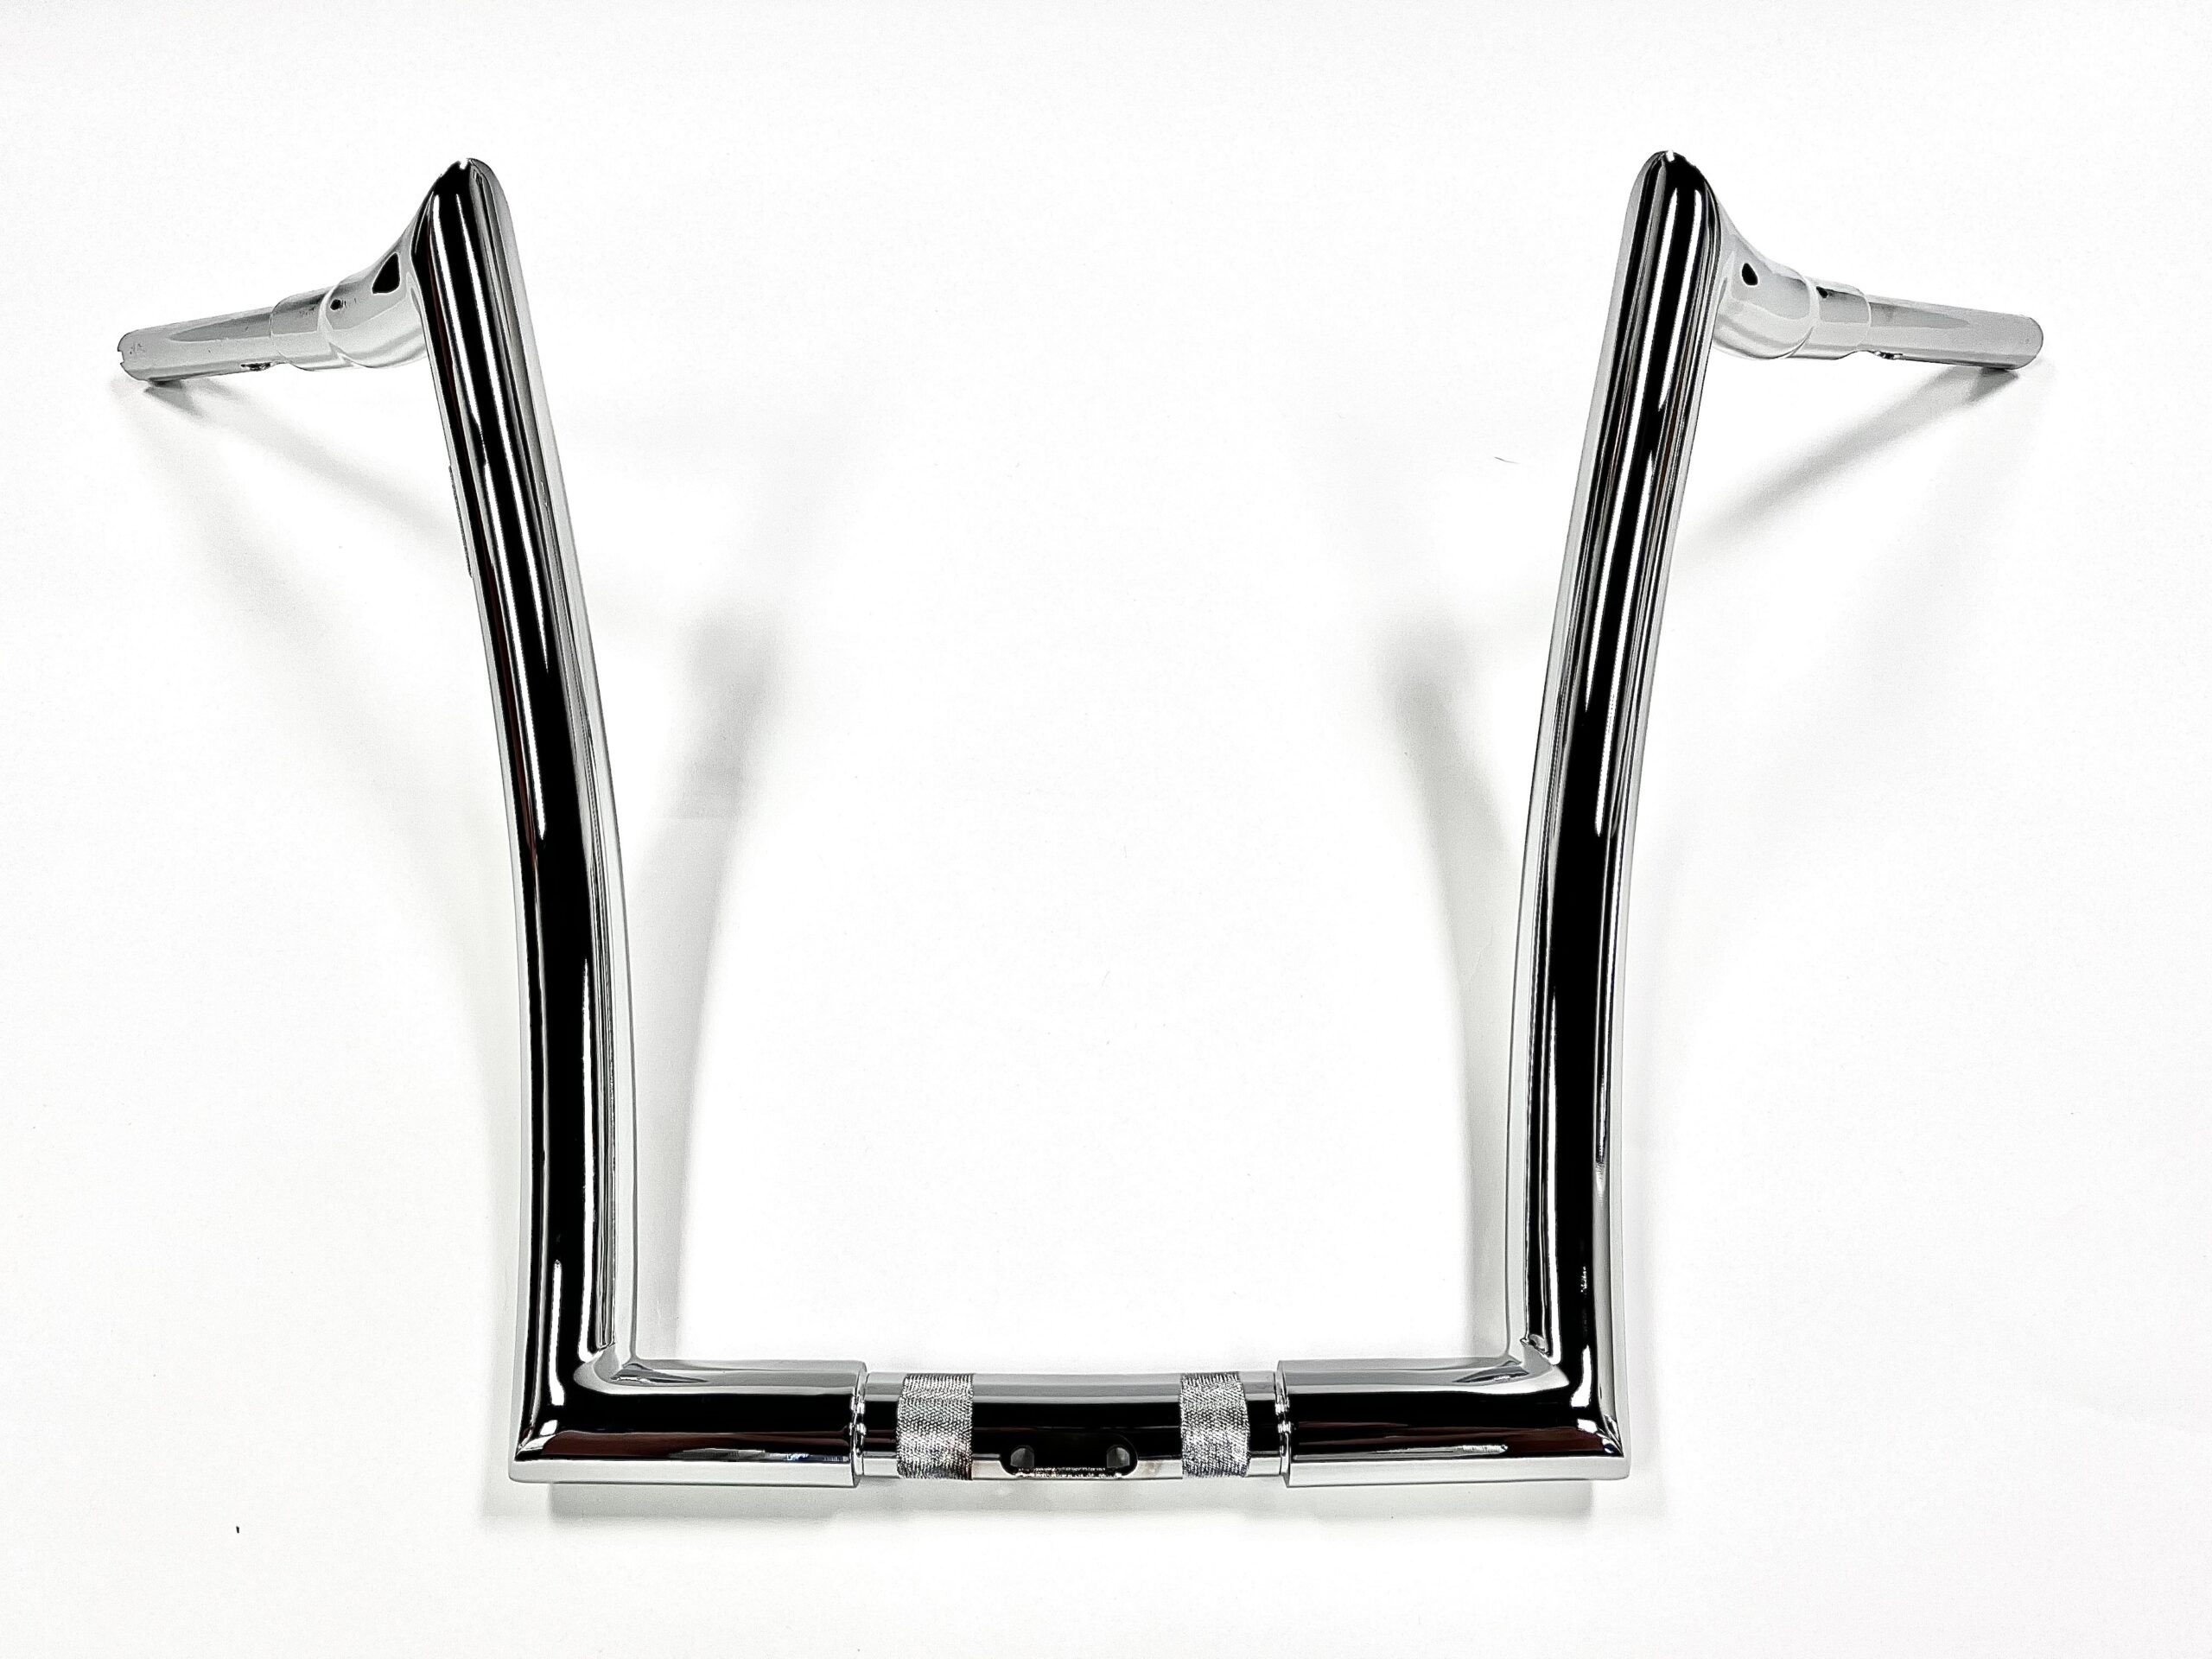 Menace Ape Meathook 16'' 1.5 Stepped Chrome Throttle By Wire